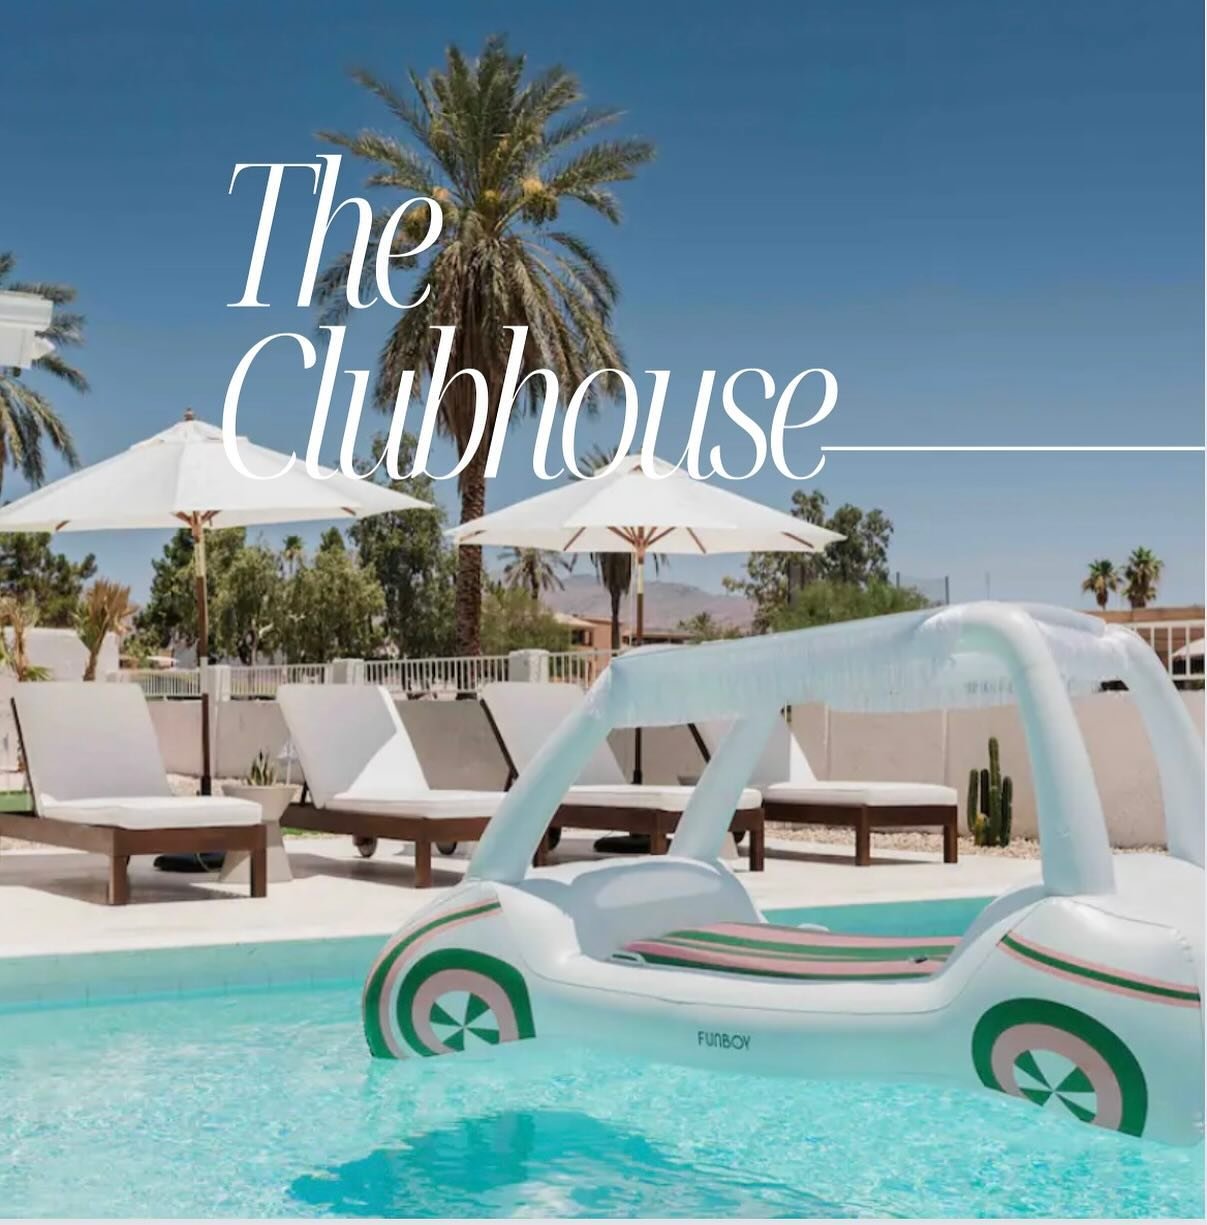 Looking for the ultimate desert oasis getaway? Look no further than the Clubhouse in Lake Havasu! Situated on the second green of the Lake Havasu Golf Club, this amazing property has room for up to 14 guests and features a pool, hot tub, putting gree